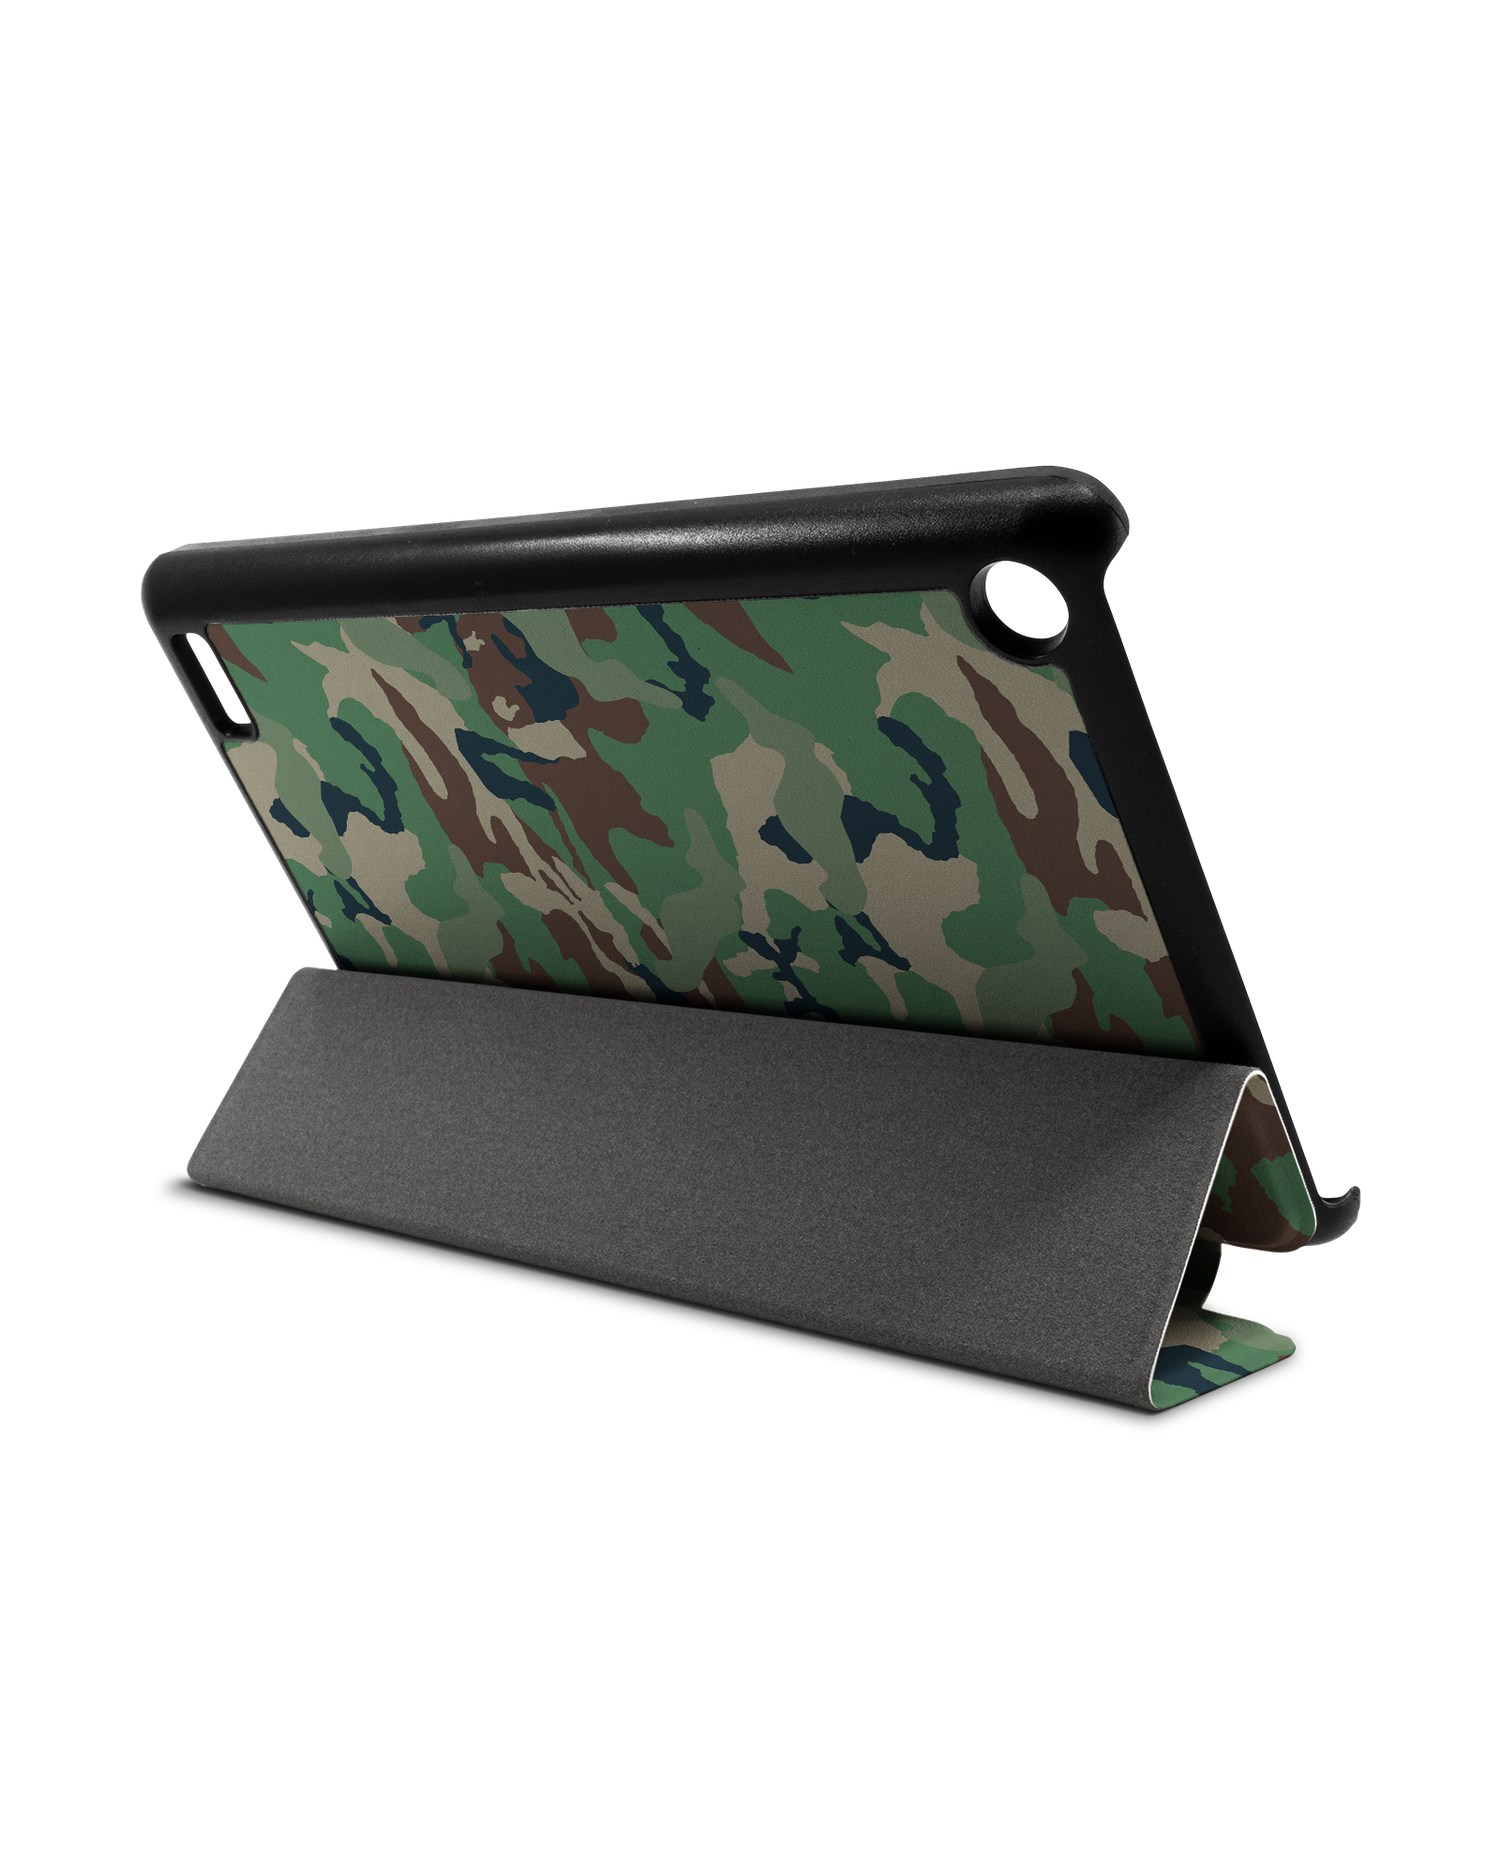 Green and Brown Camo Tablet Smart Case for Amazon Fire 7: Used as Stand